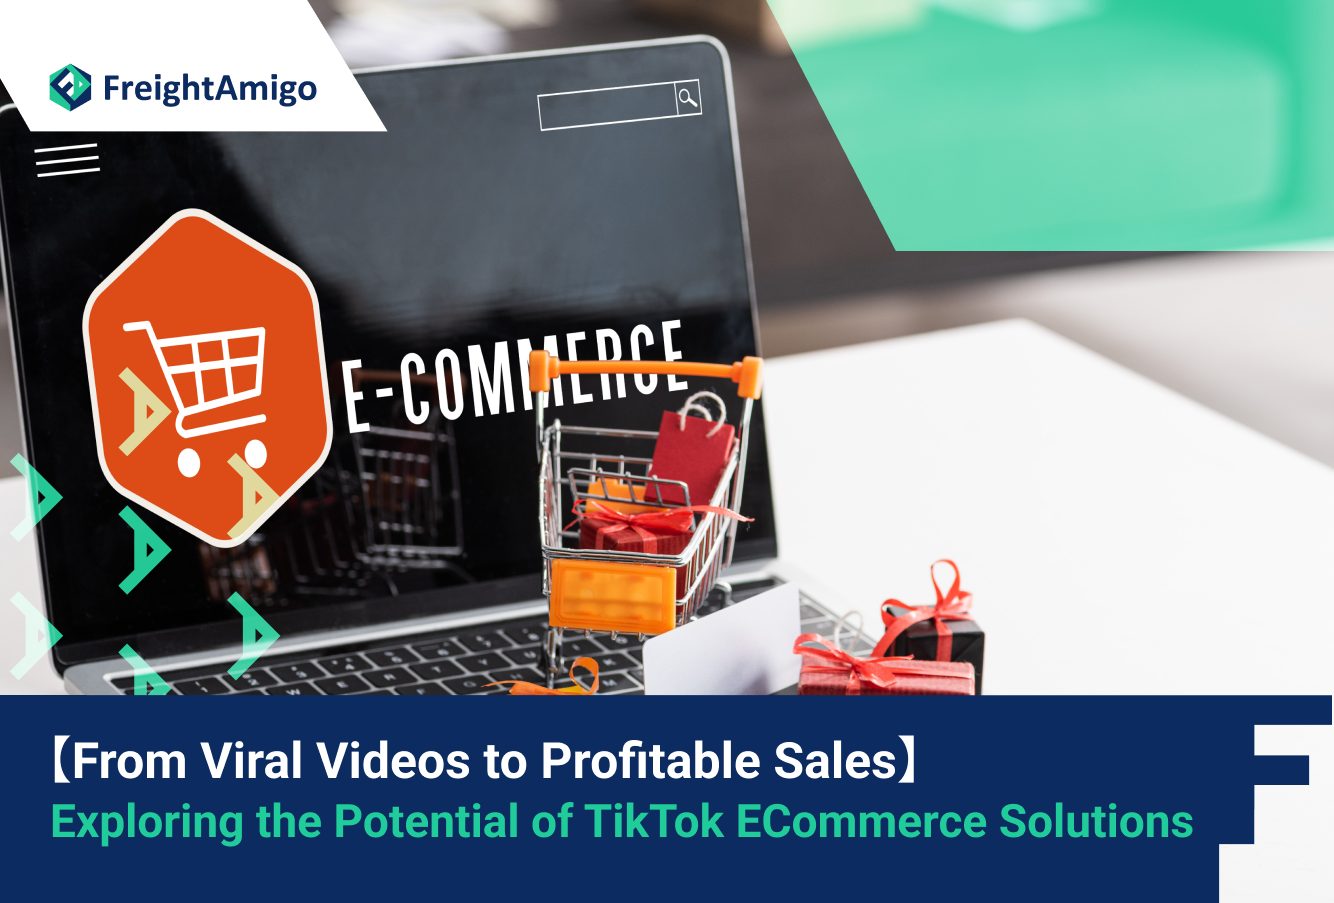 From Viral Videos to Profitable Sales: Exploring the Potential of TikTok ECommerce Solutions